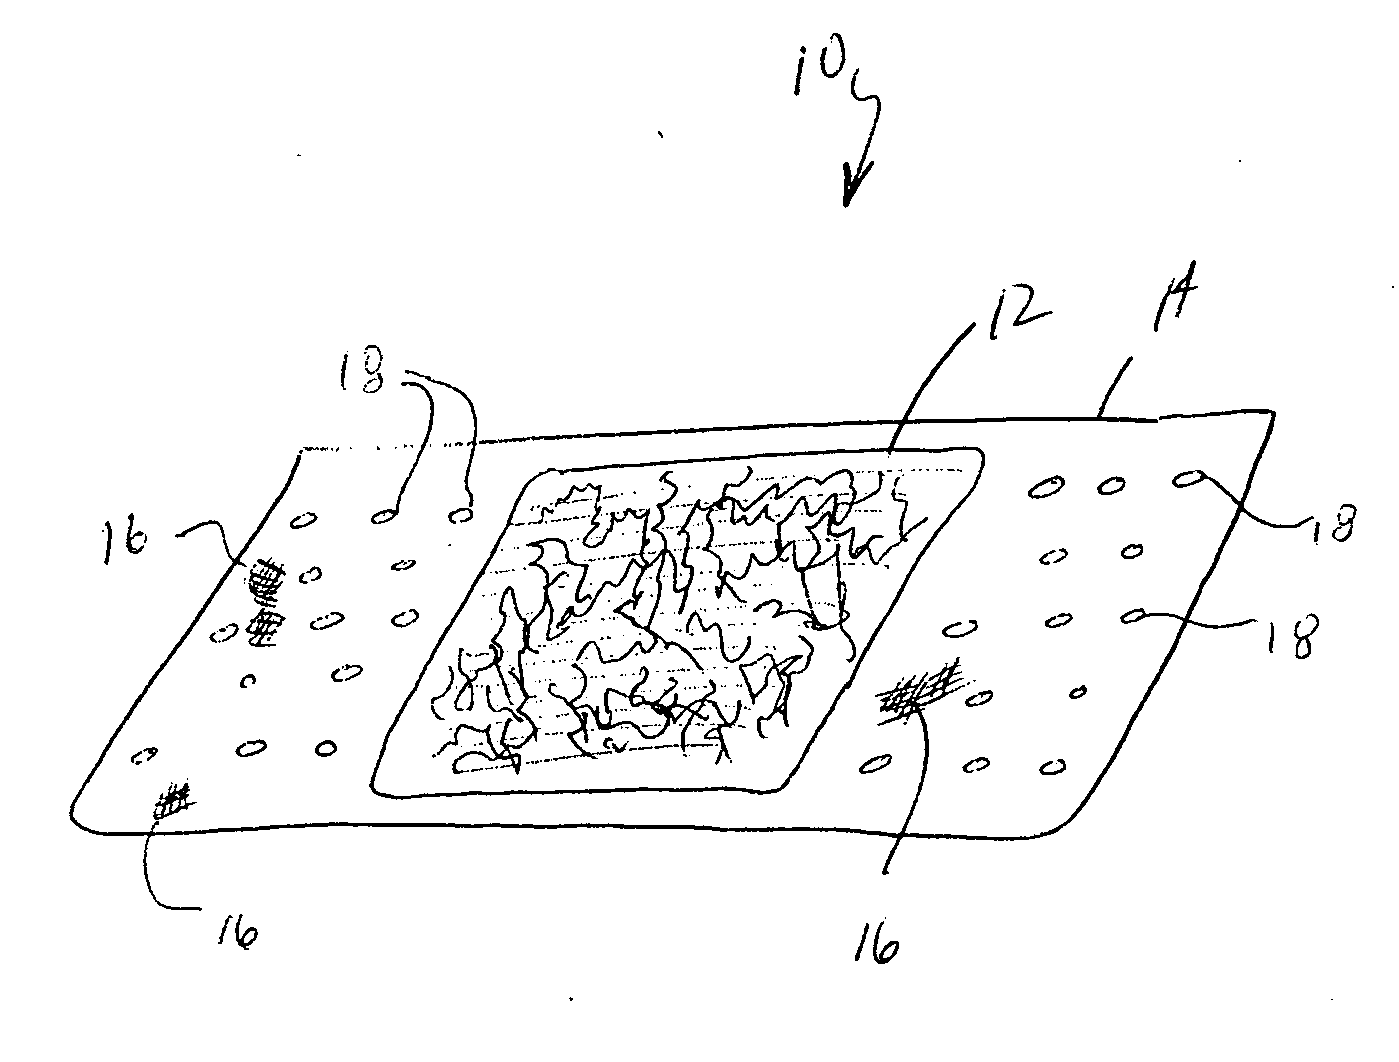 Agents and devices for providing blood clotting functions to wounds